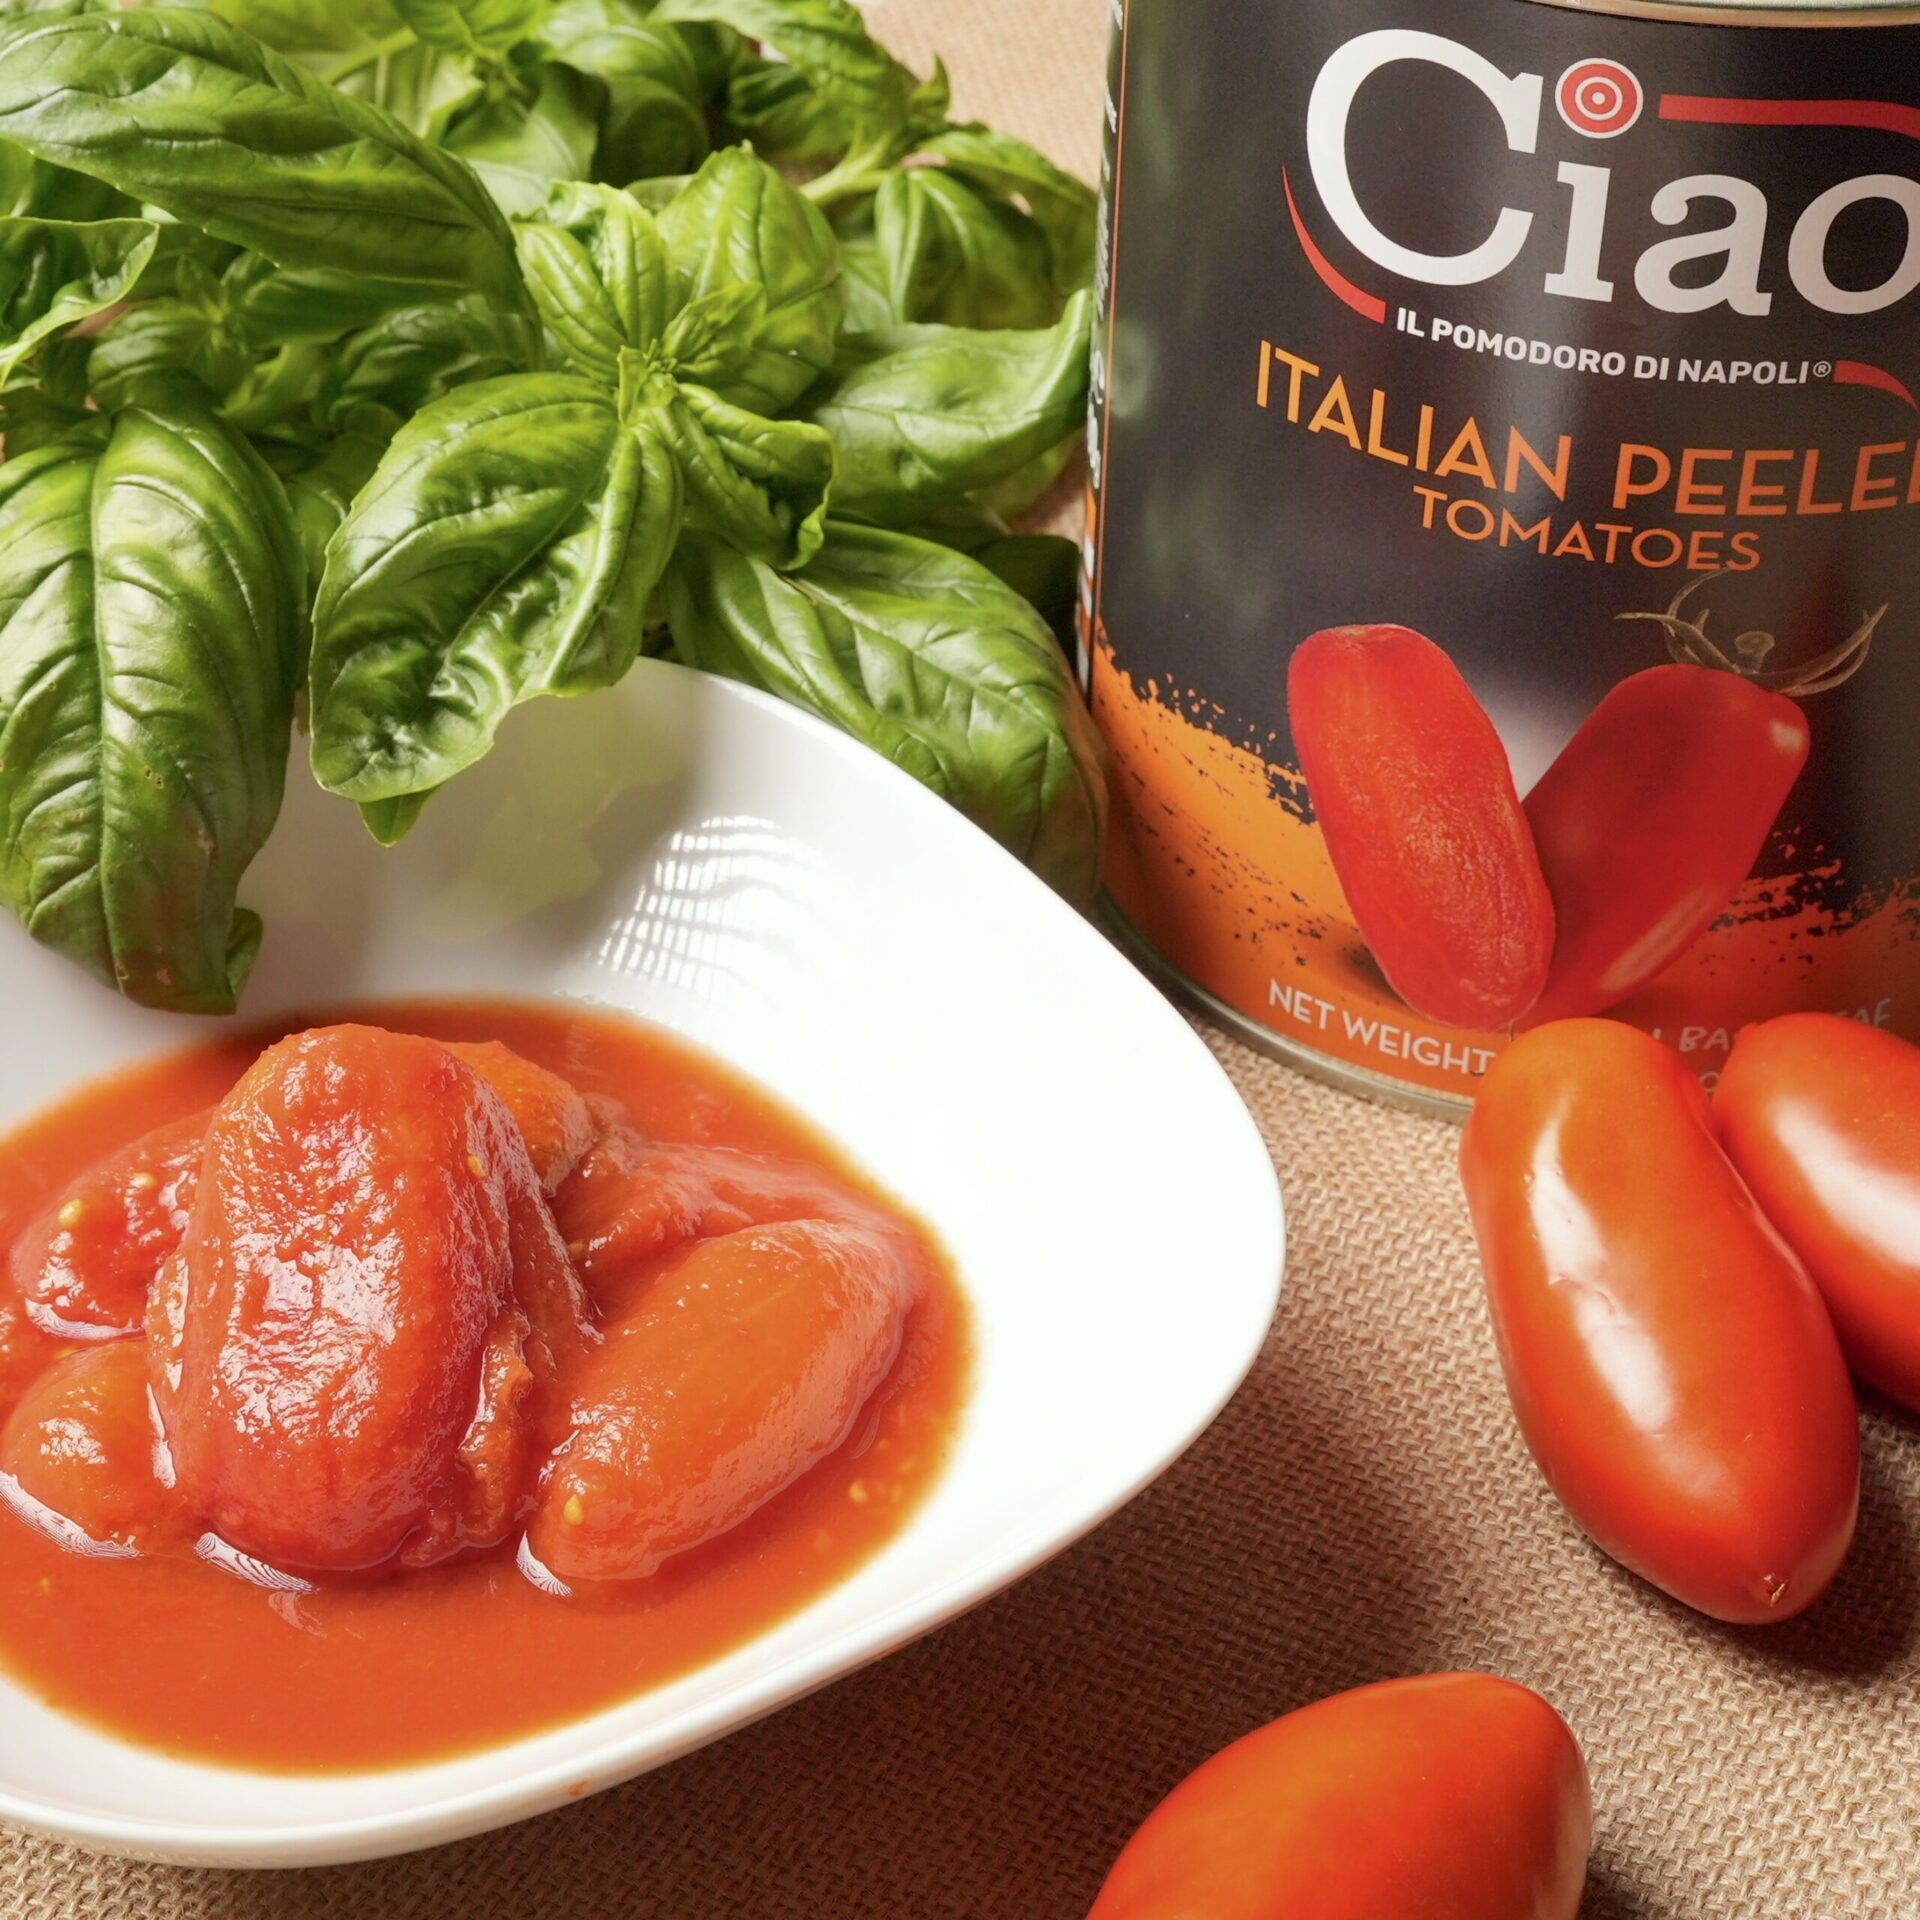 The contents of a can of Ciao tomatoes